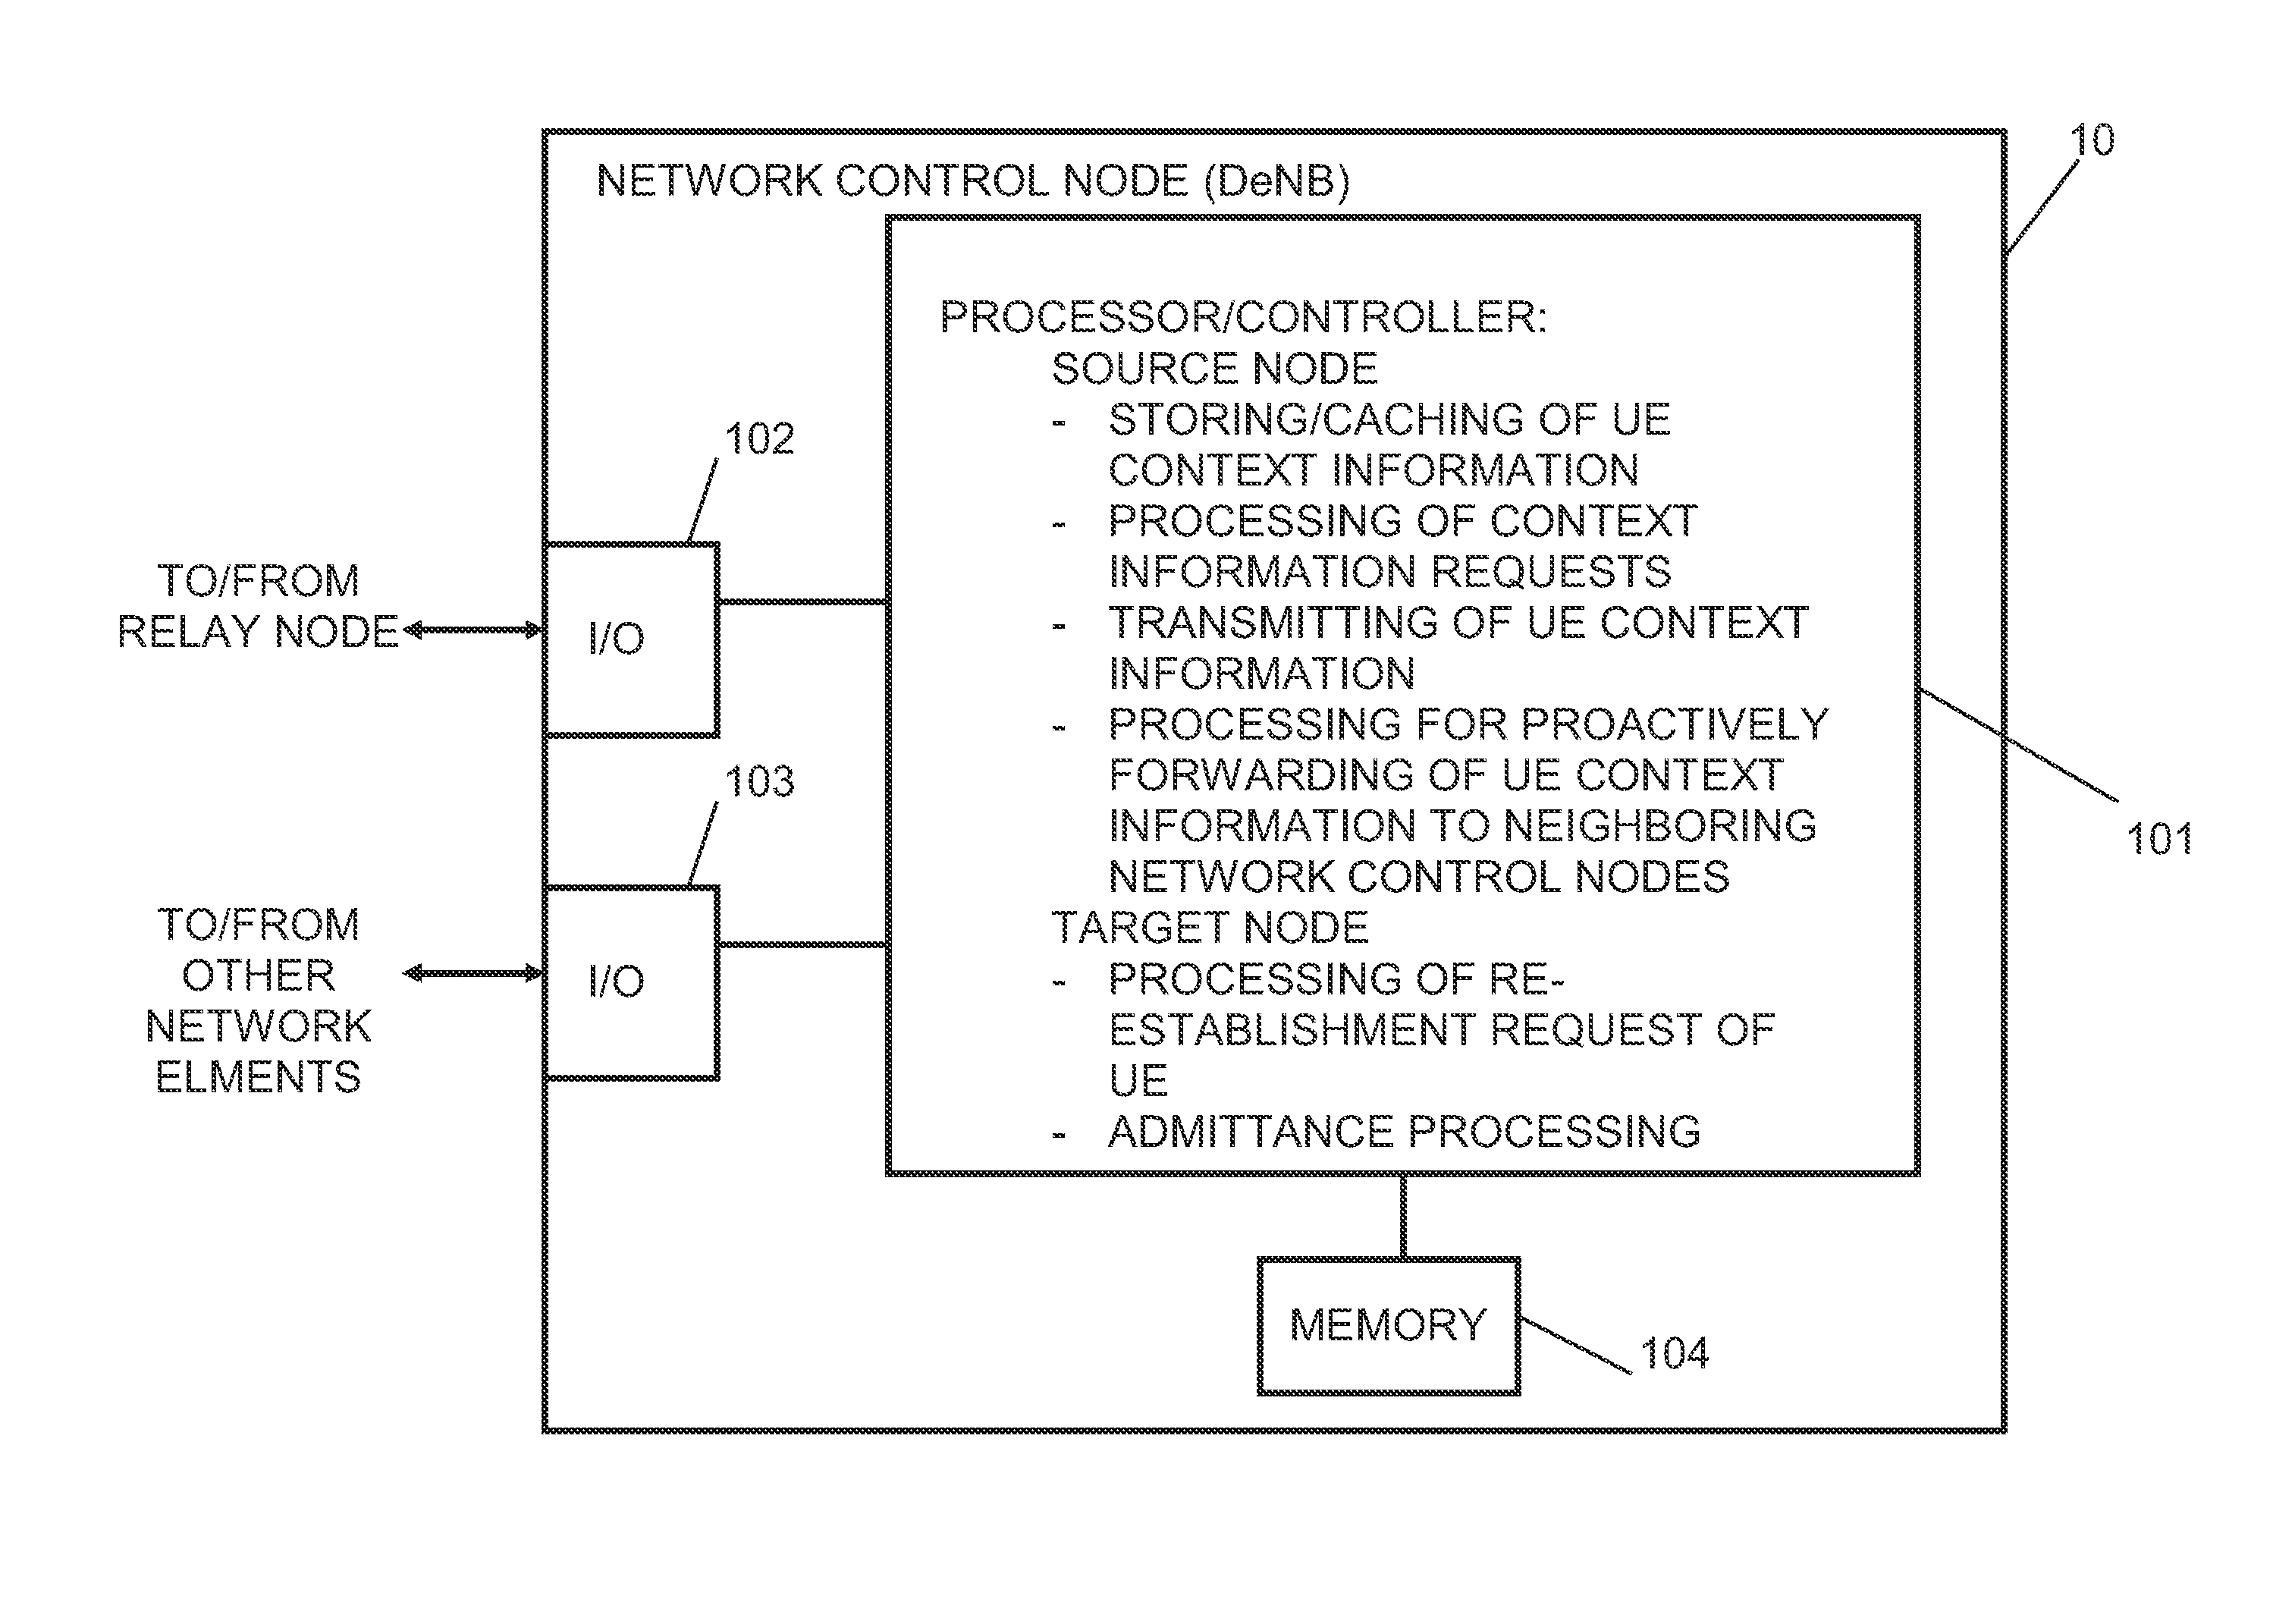 Radio Link Failure Recovery Control in Communication Network Having Relay Nodes